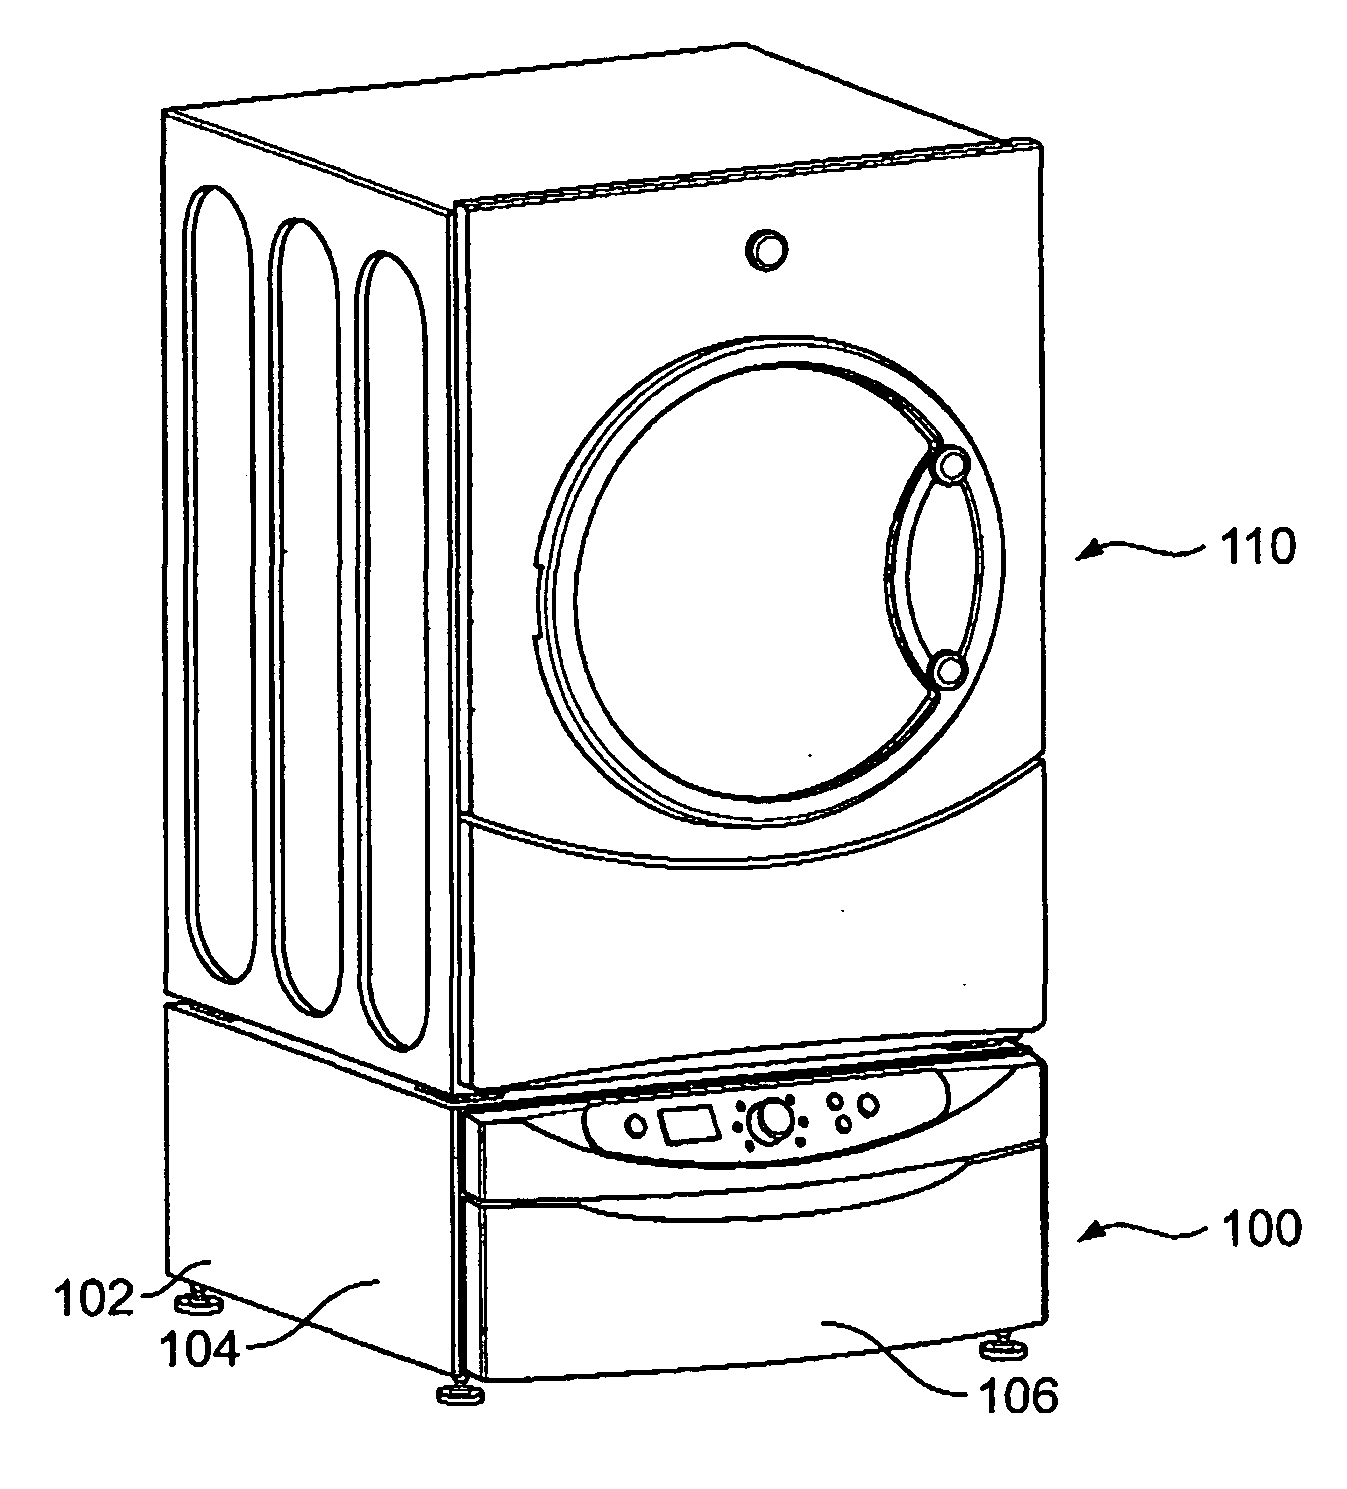 Methods and apparatus for disinfecting and/or deodorizing an article